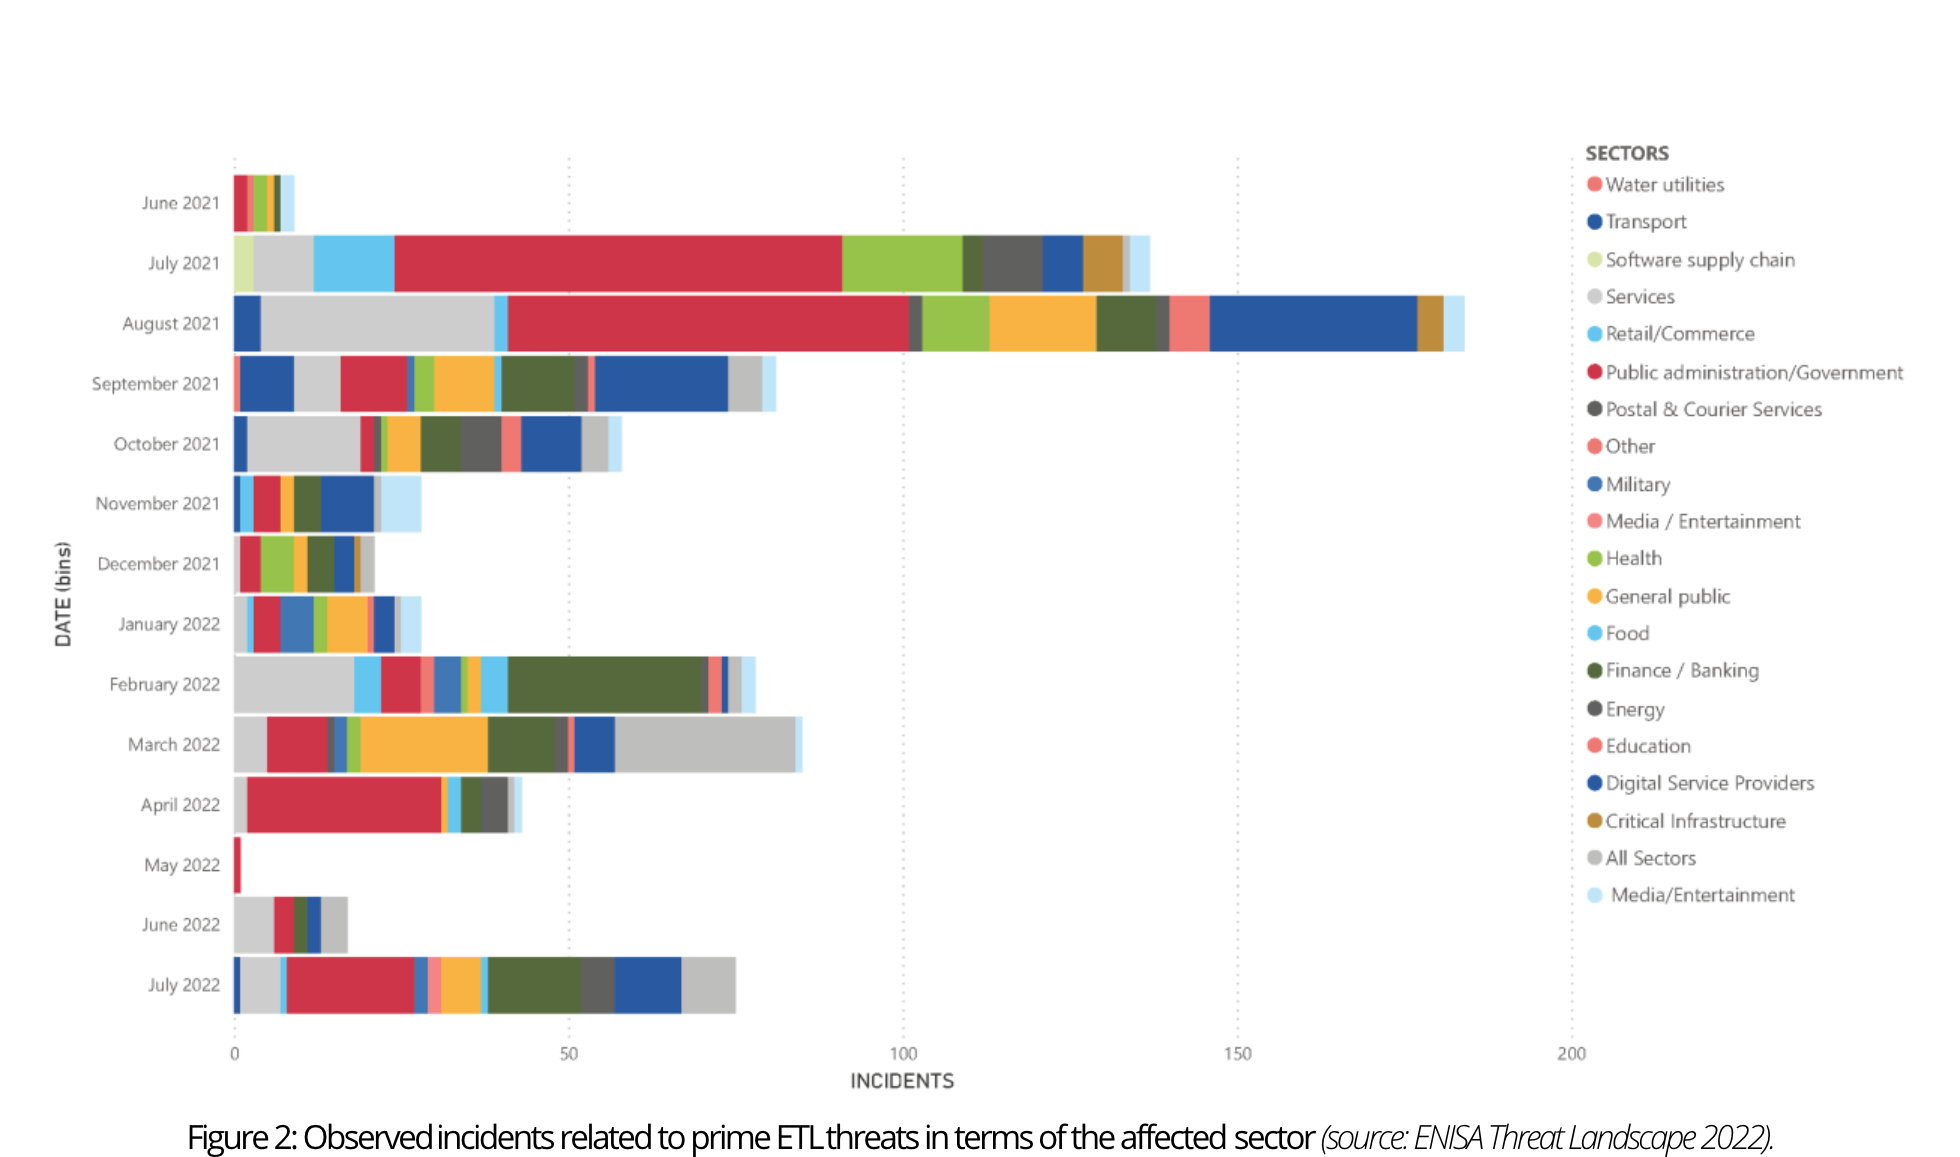 Figure 3: Observed incidents related to prime ETL threats in terms of the affected sector.